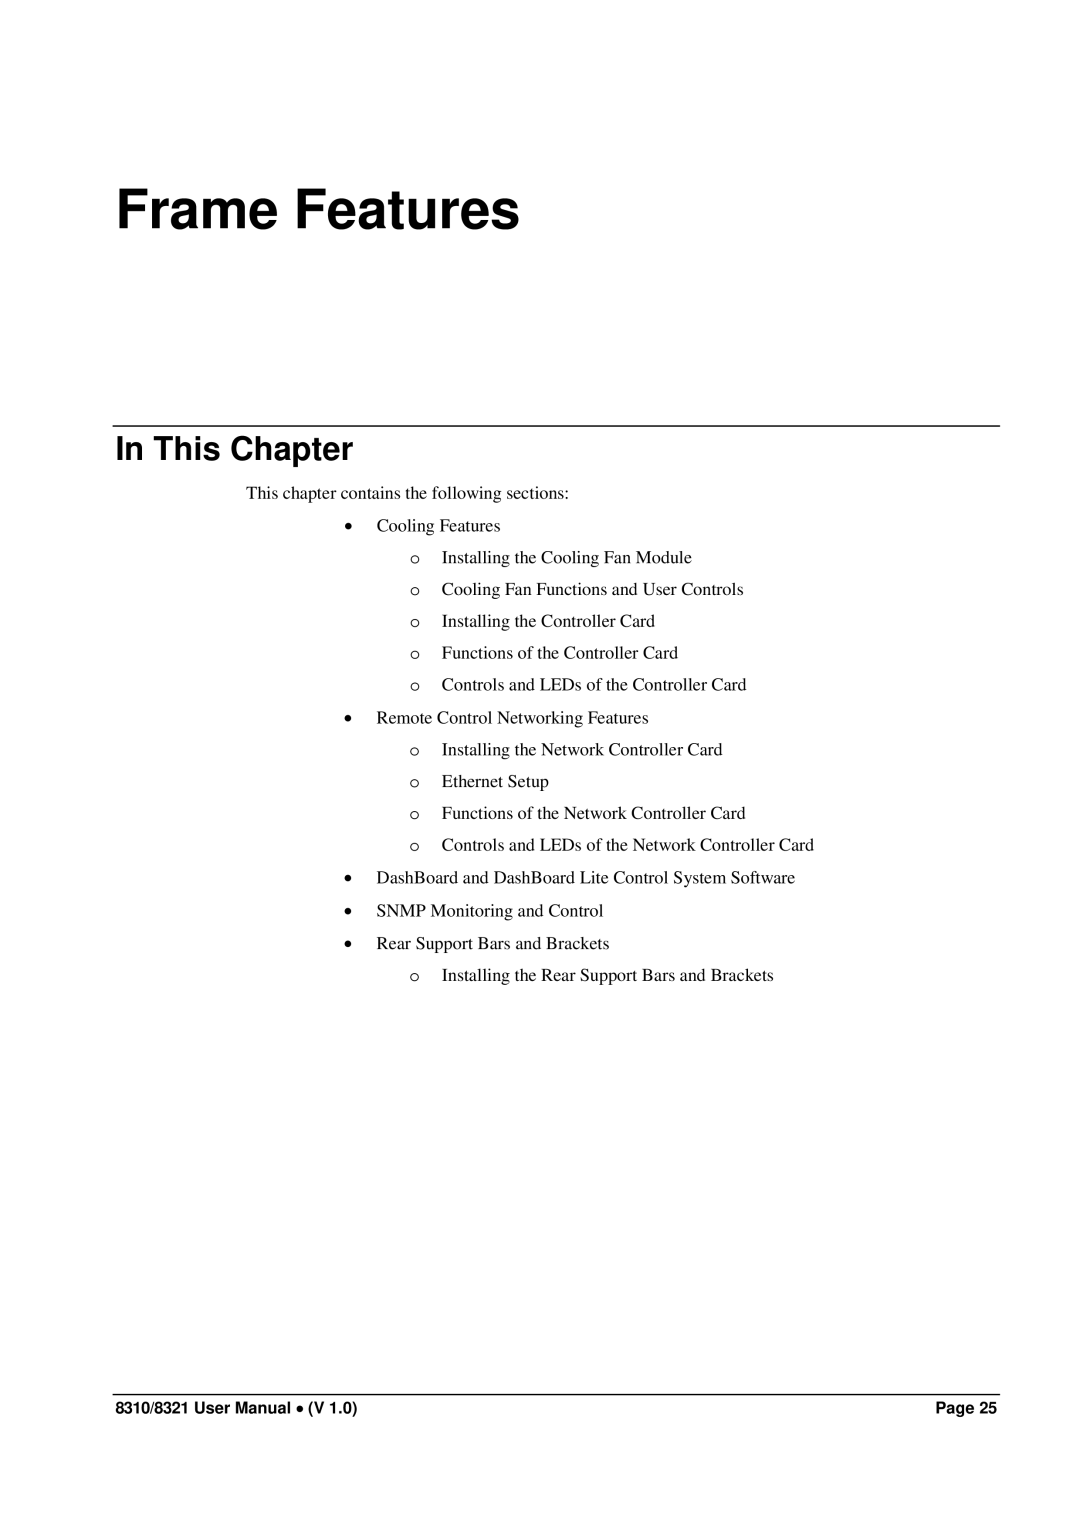 Cobalt Networks 8321(-C), 8310(-C) user manual Frame Features, This Chapter 